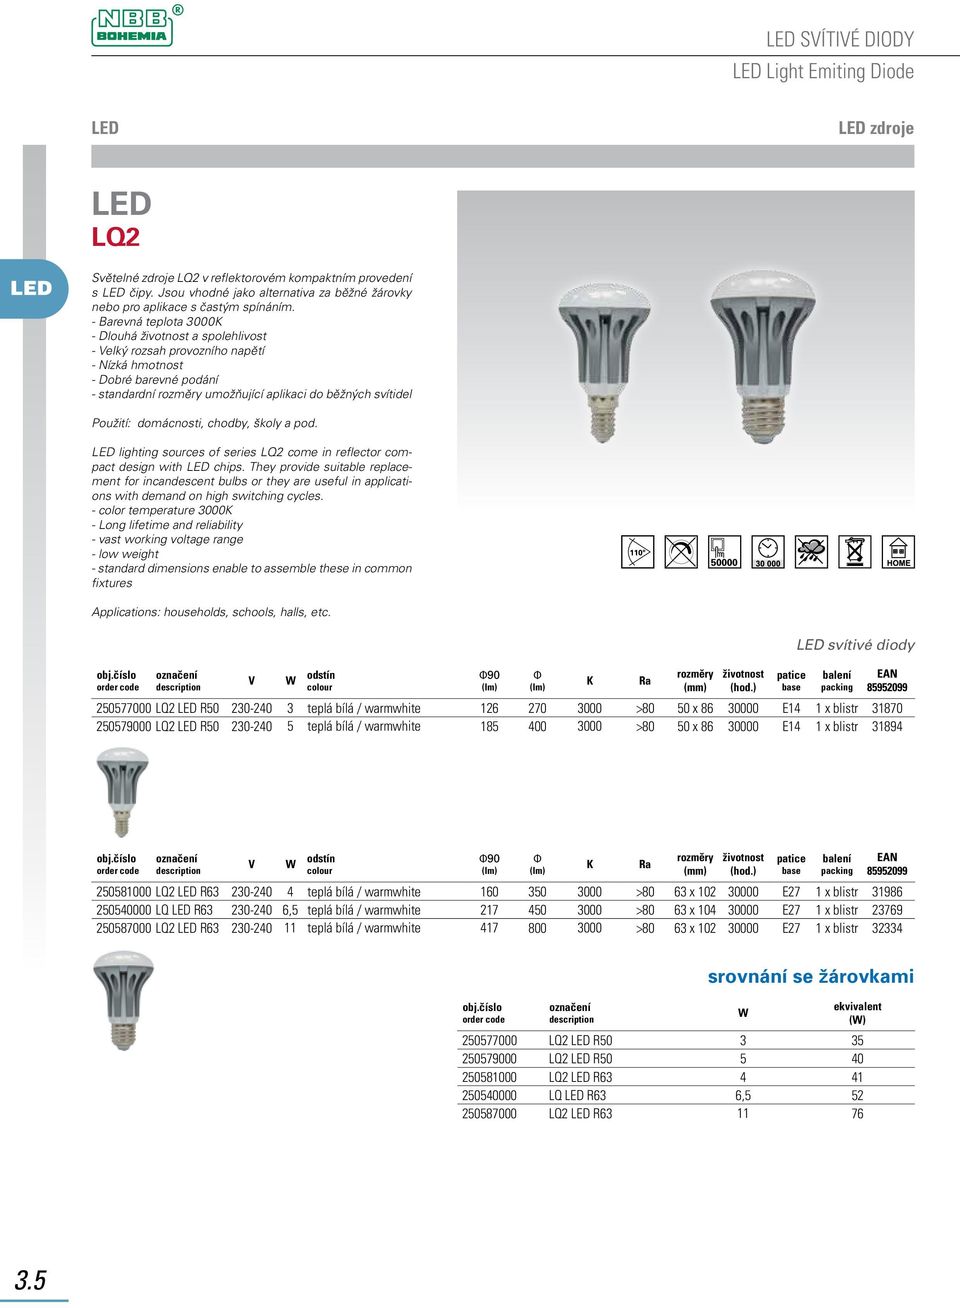 chodby, školy a pod. lighting sources of series LQ2 come in reflector compact design with chips.